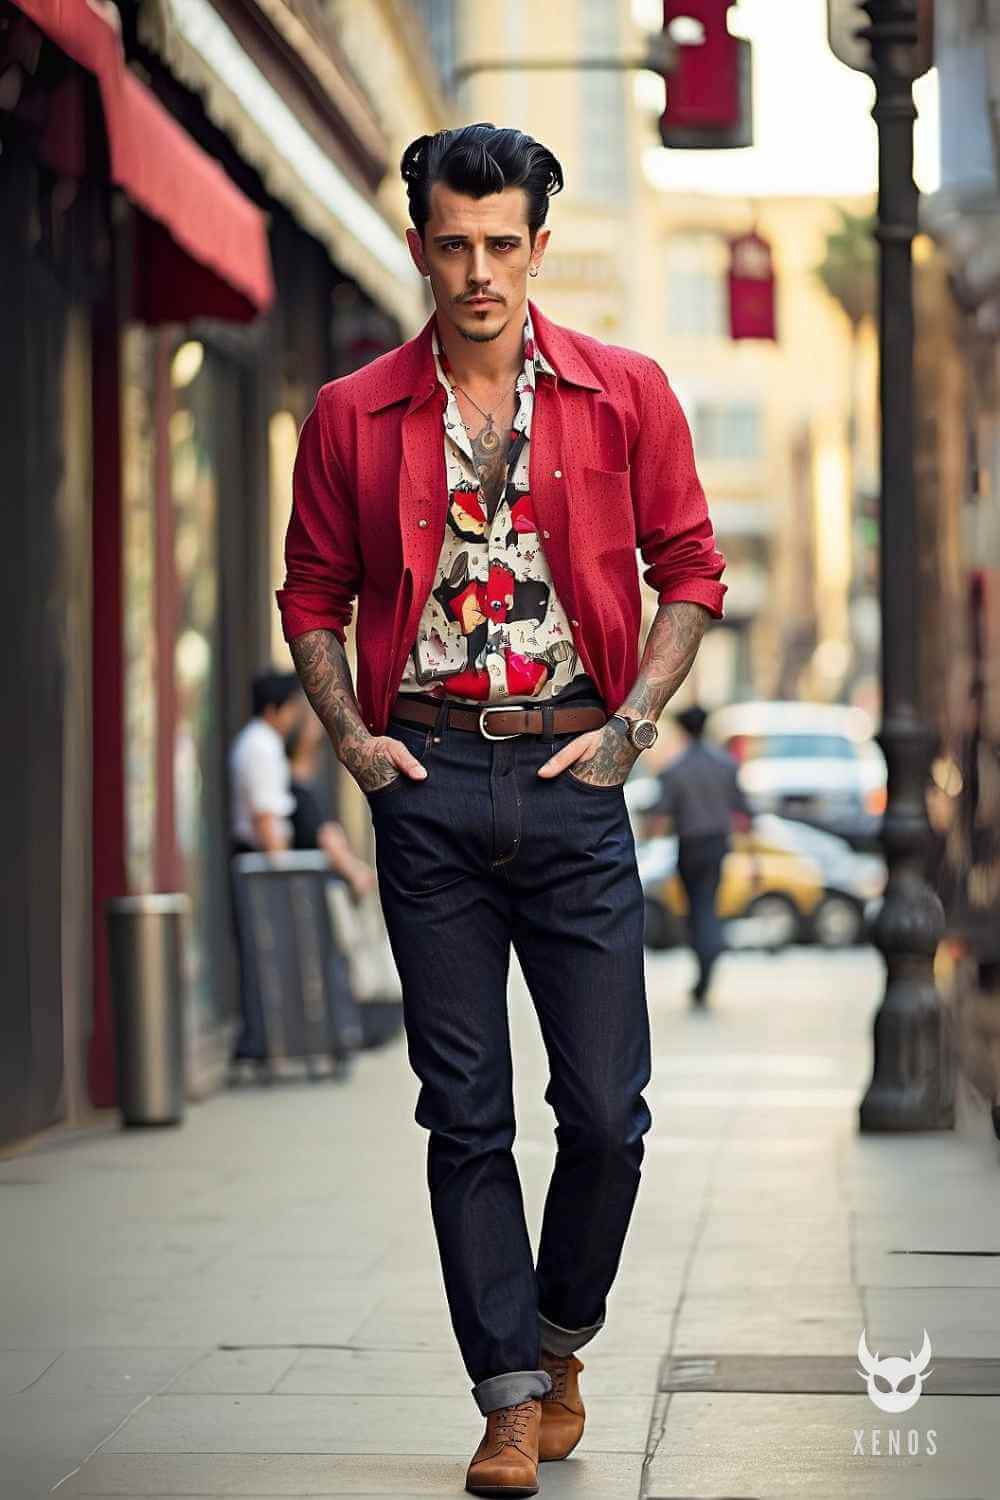 How to Perfect Men's Rockabilly Style: Six Pro Tips